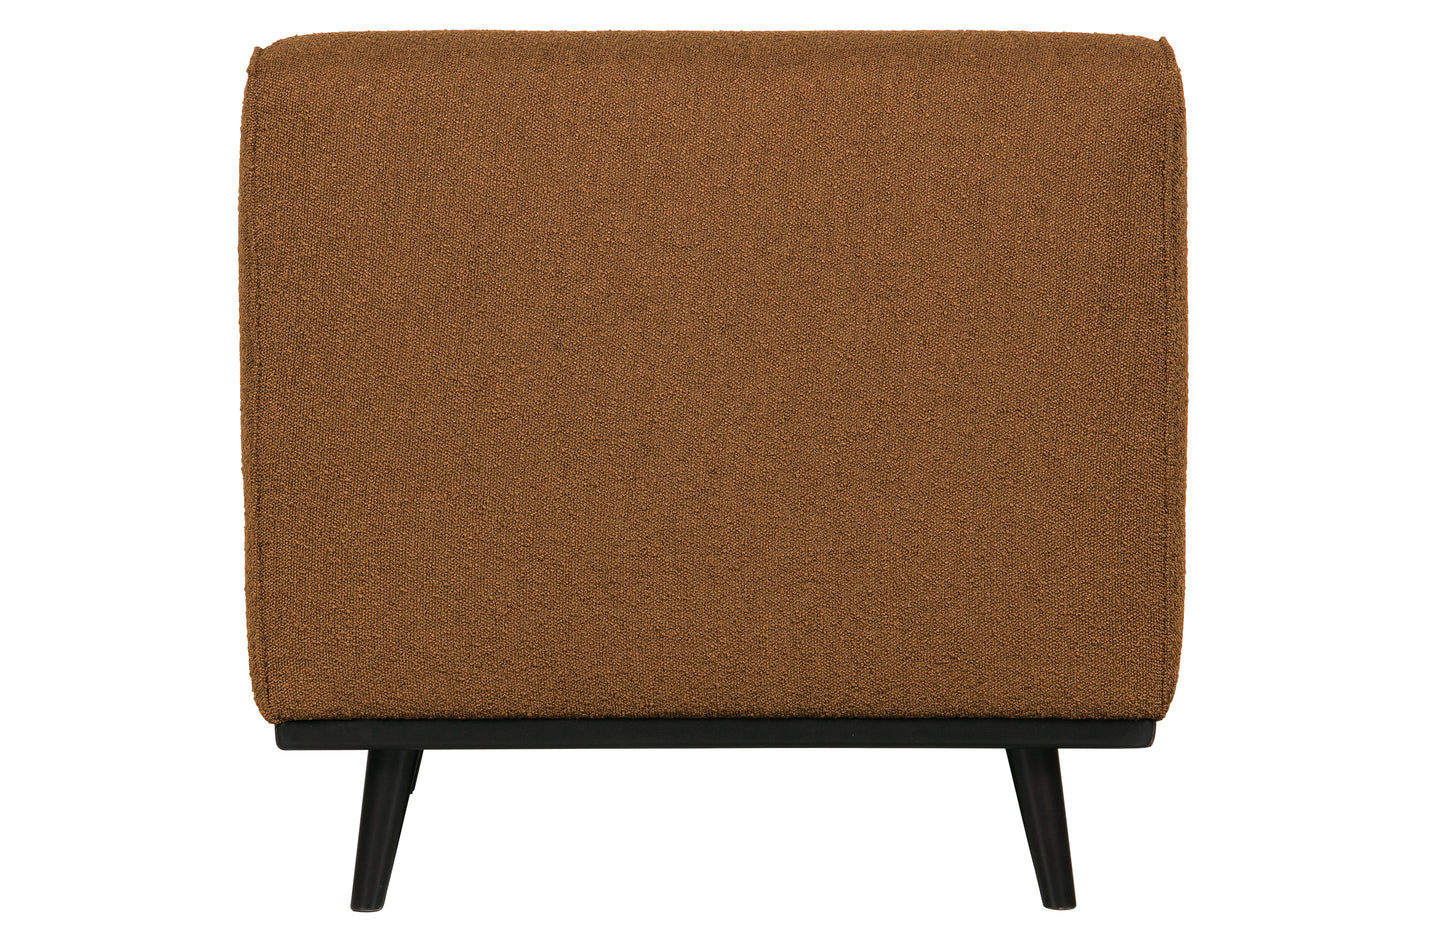 BEPUREHOME | Statement-Stuhl Boucle Butter